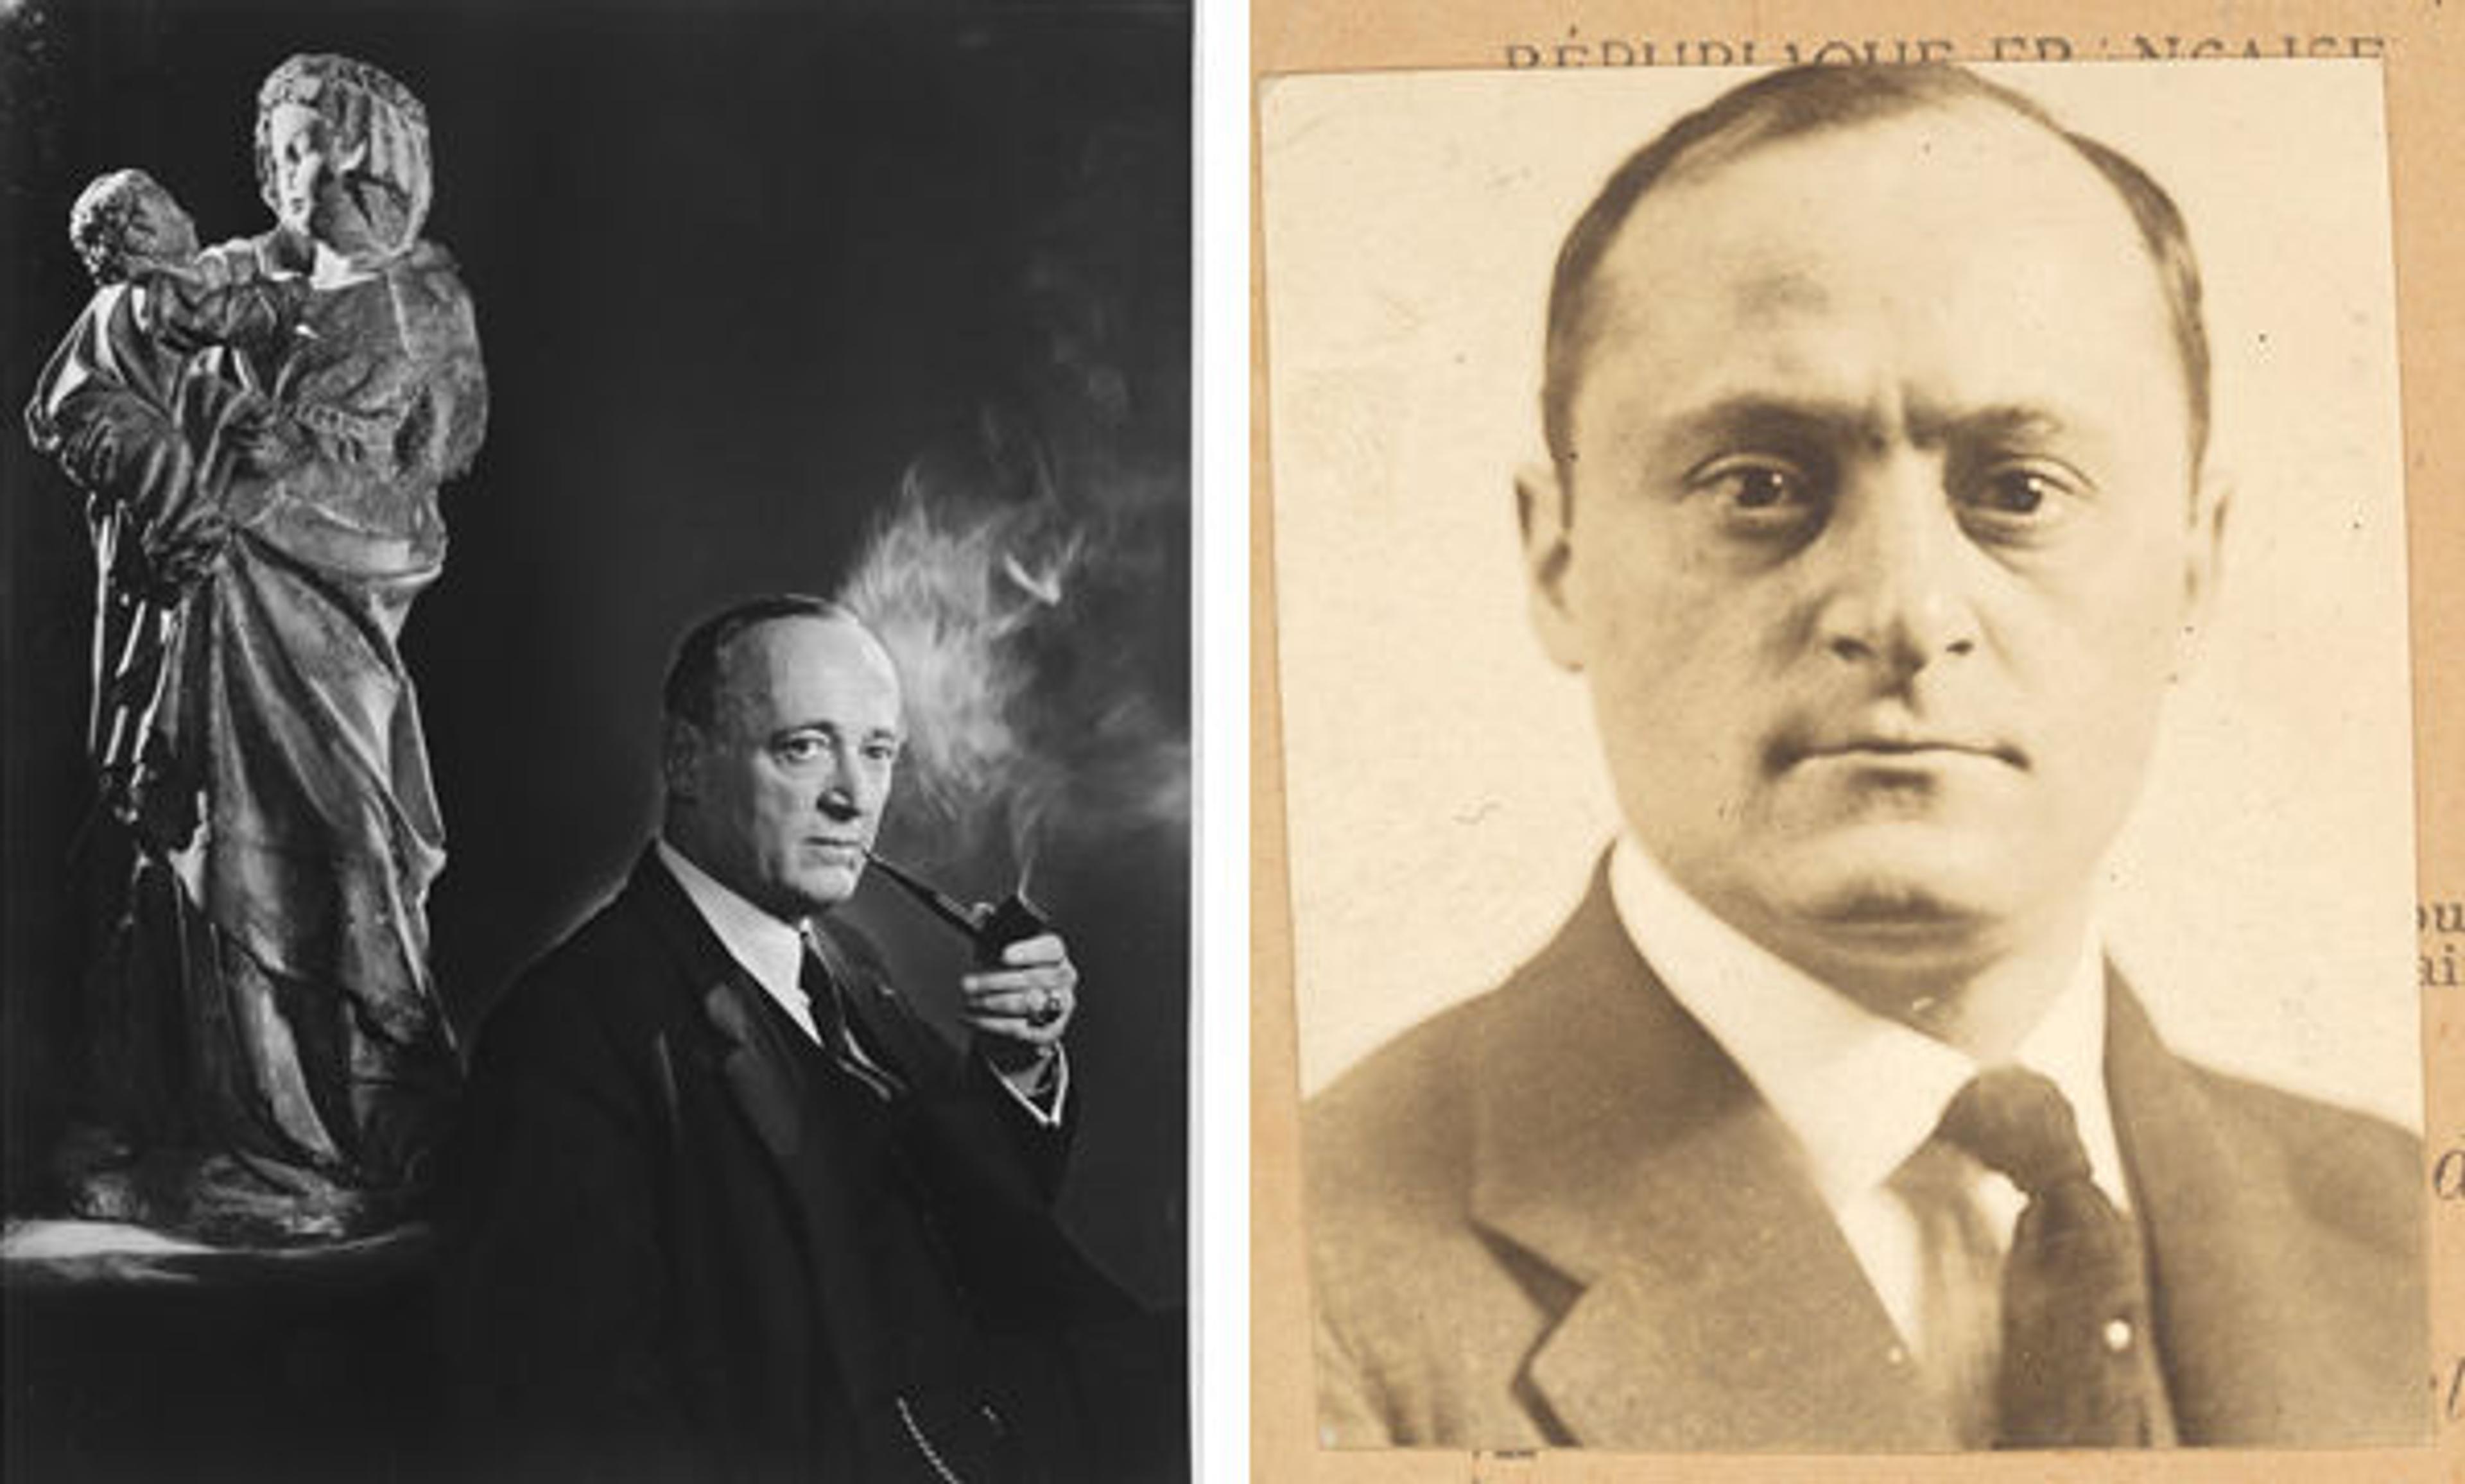 Left: James Rorimer, curator at The Cloisters, in 1967. © Yousuf Karsh. Right: Art dealer Joseph Brummer's French identity card, 1920. The Cloisters Library and Archives